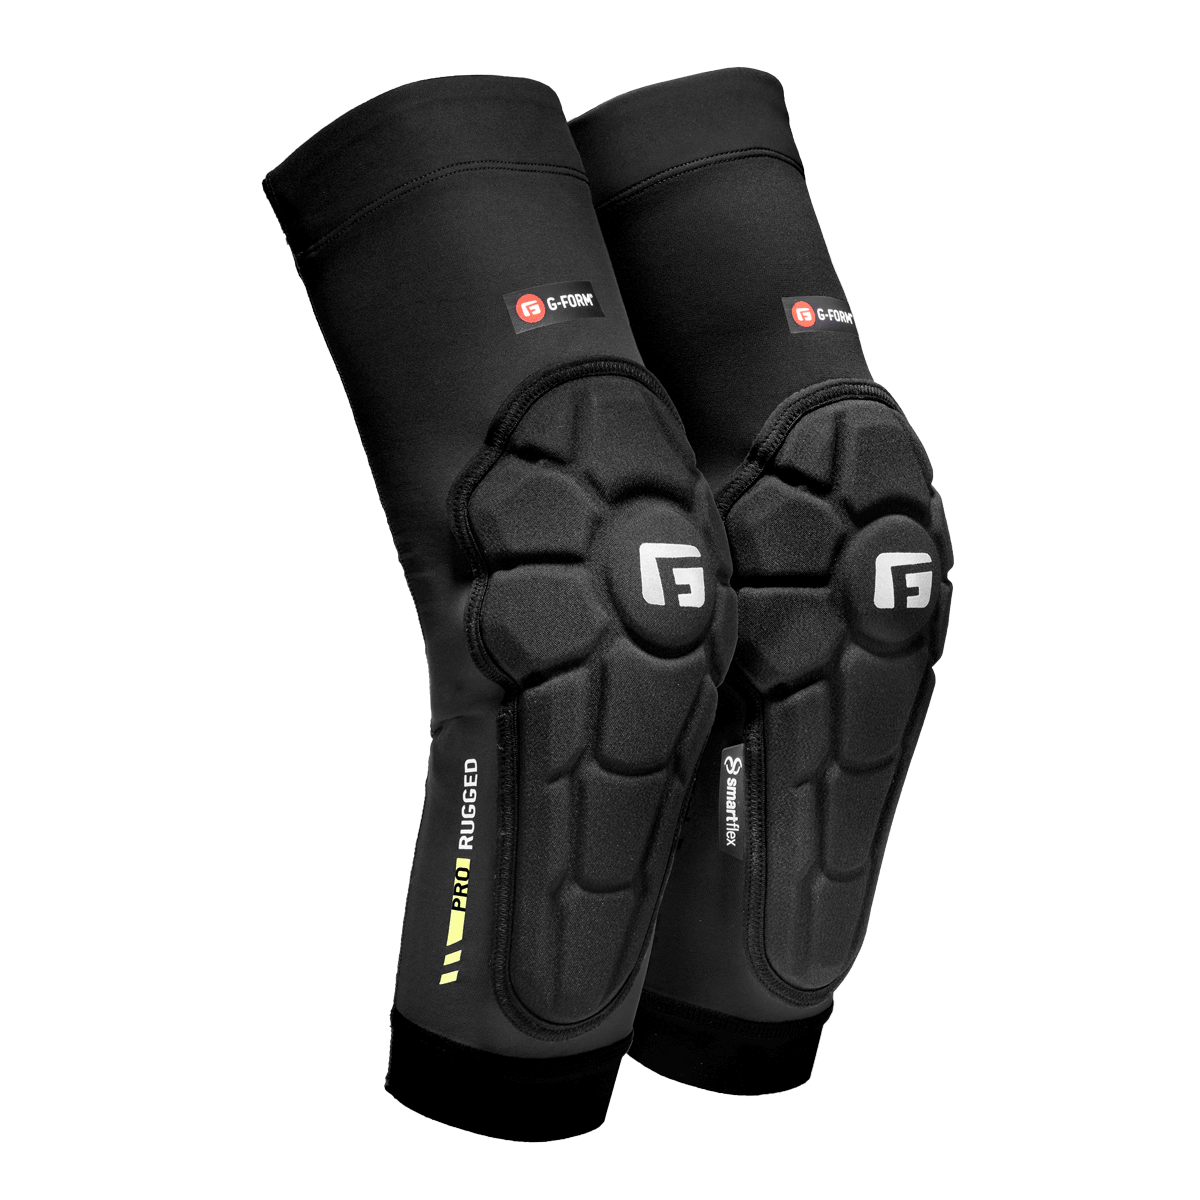 Pro-Rugged 2 MTB Elbow Guards